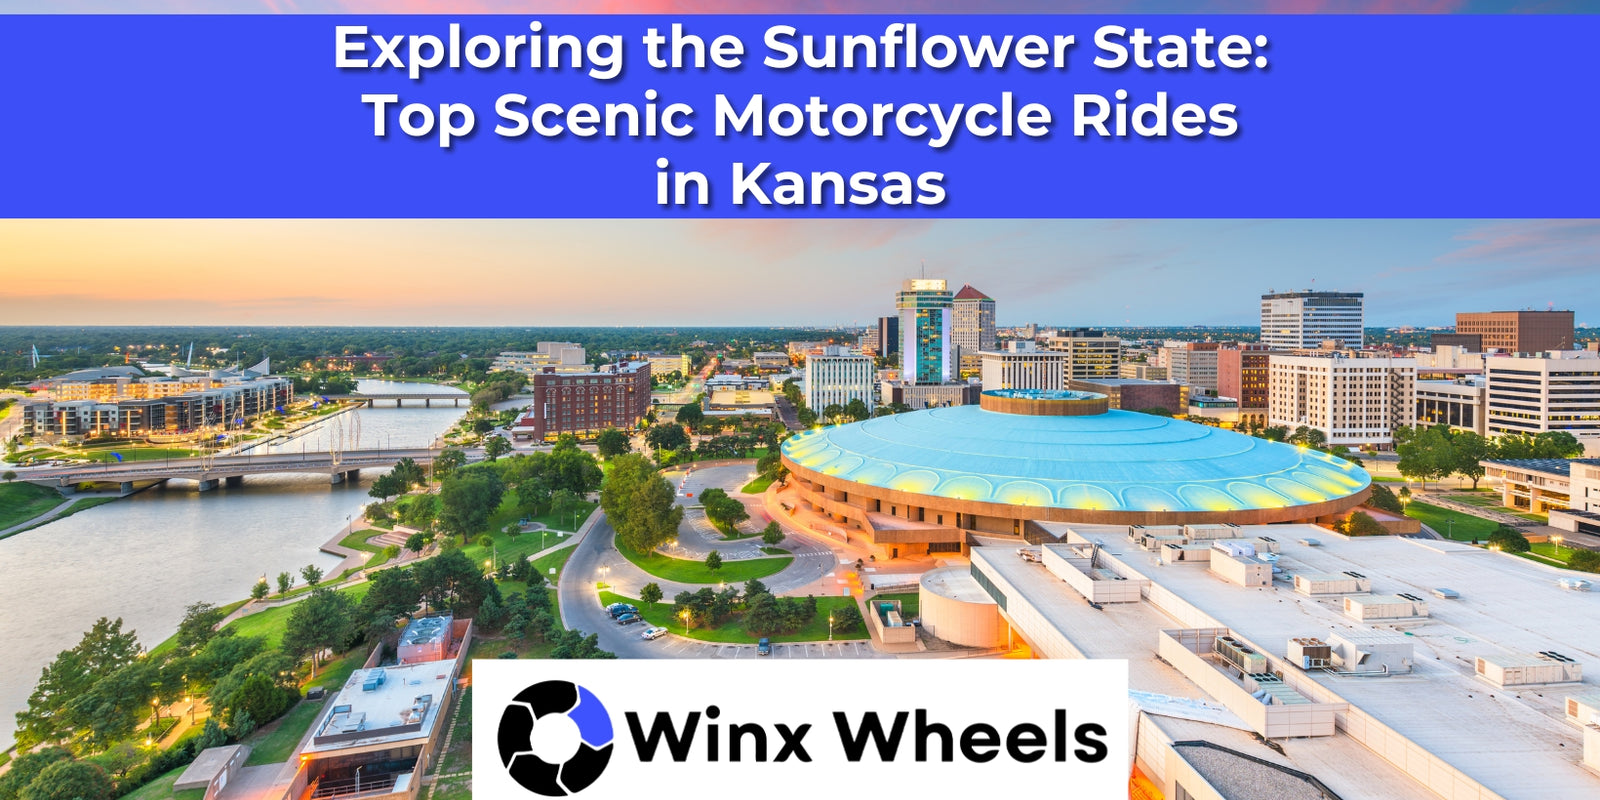 Exploring the Sunflower State: Top Scenic Motorcycle Rides in Kansas